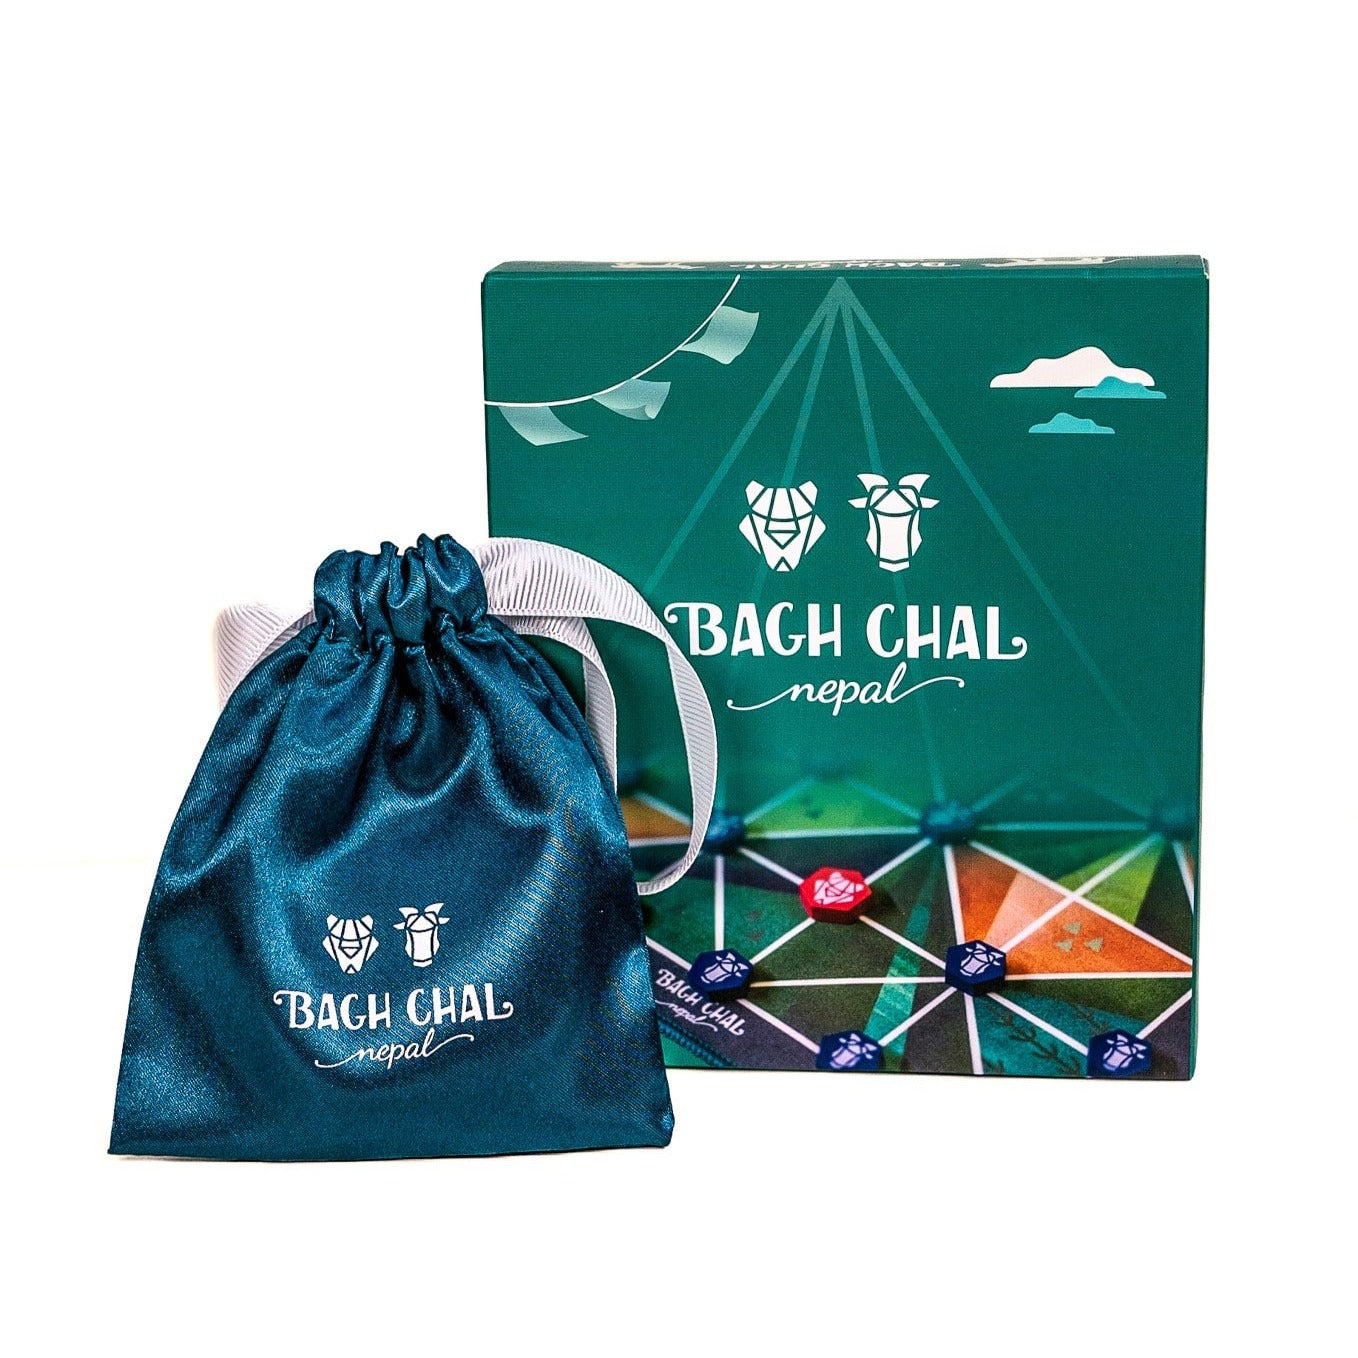 Bagh Chal deluxe edition in box